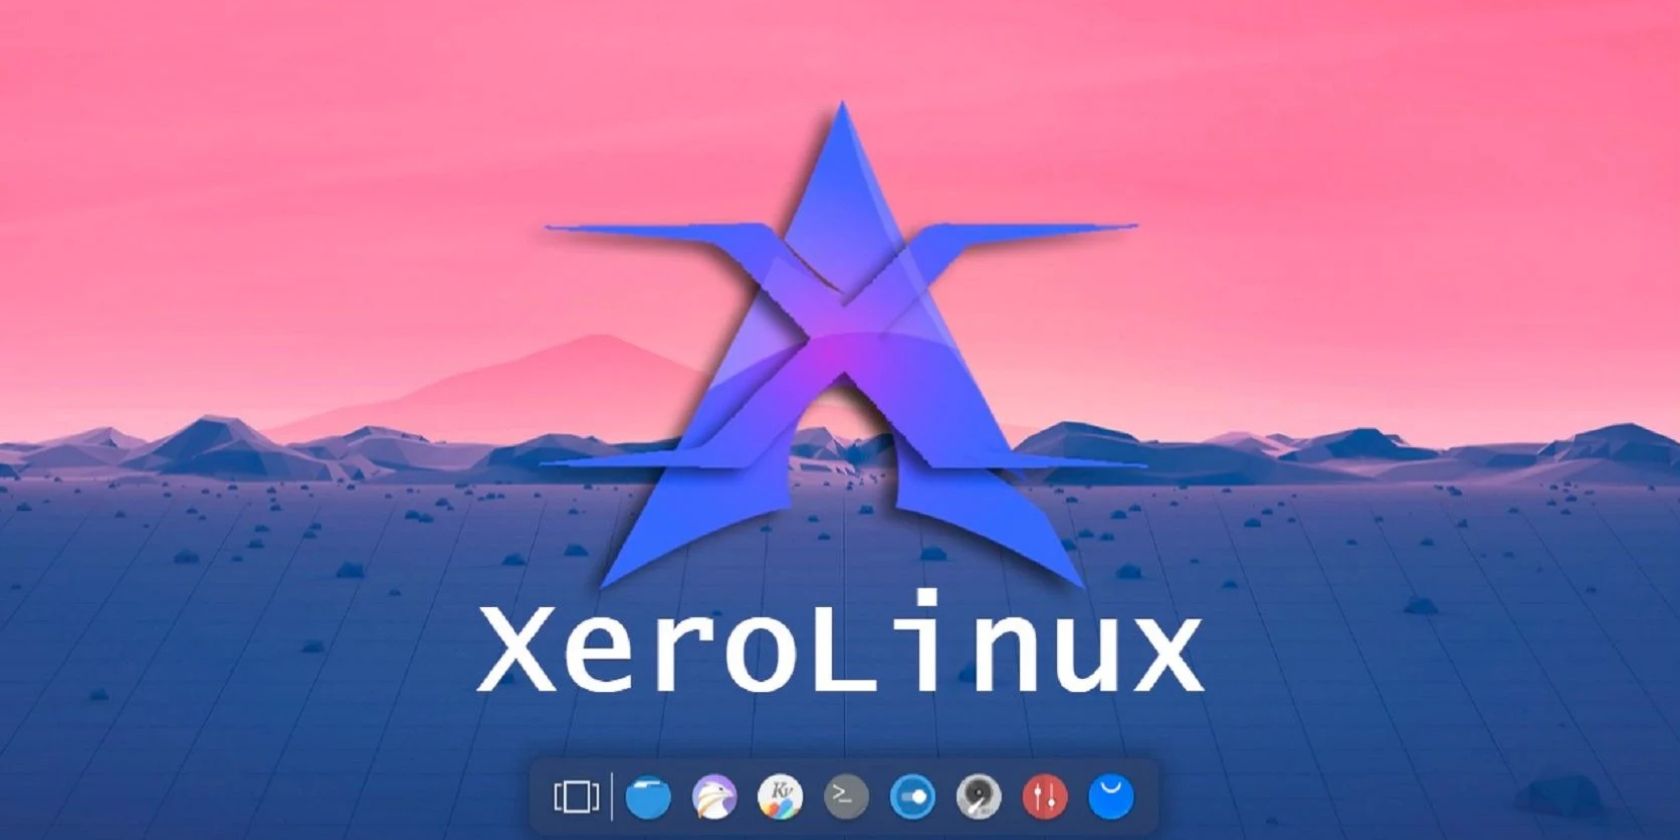 XeroLinux A Beautiful ArchBased Linux Distribution for Beginners